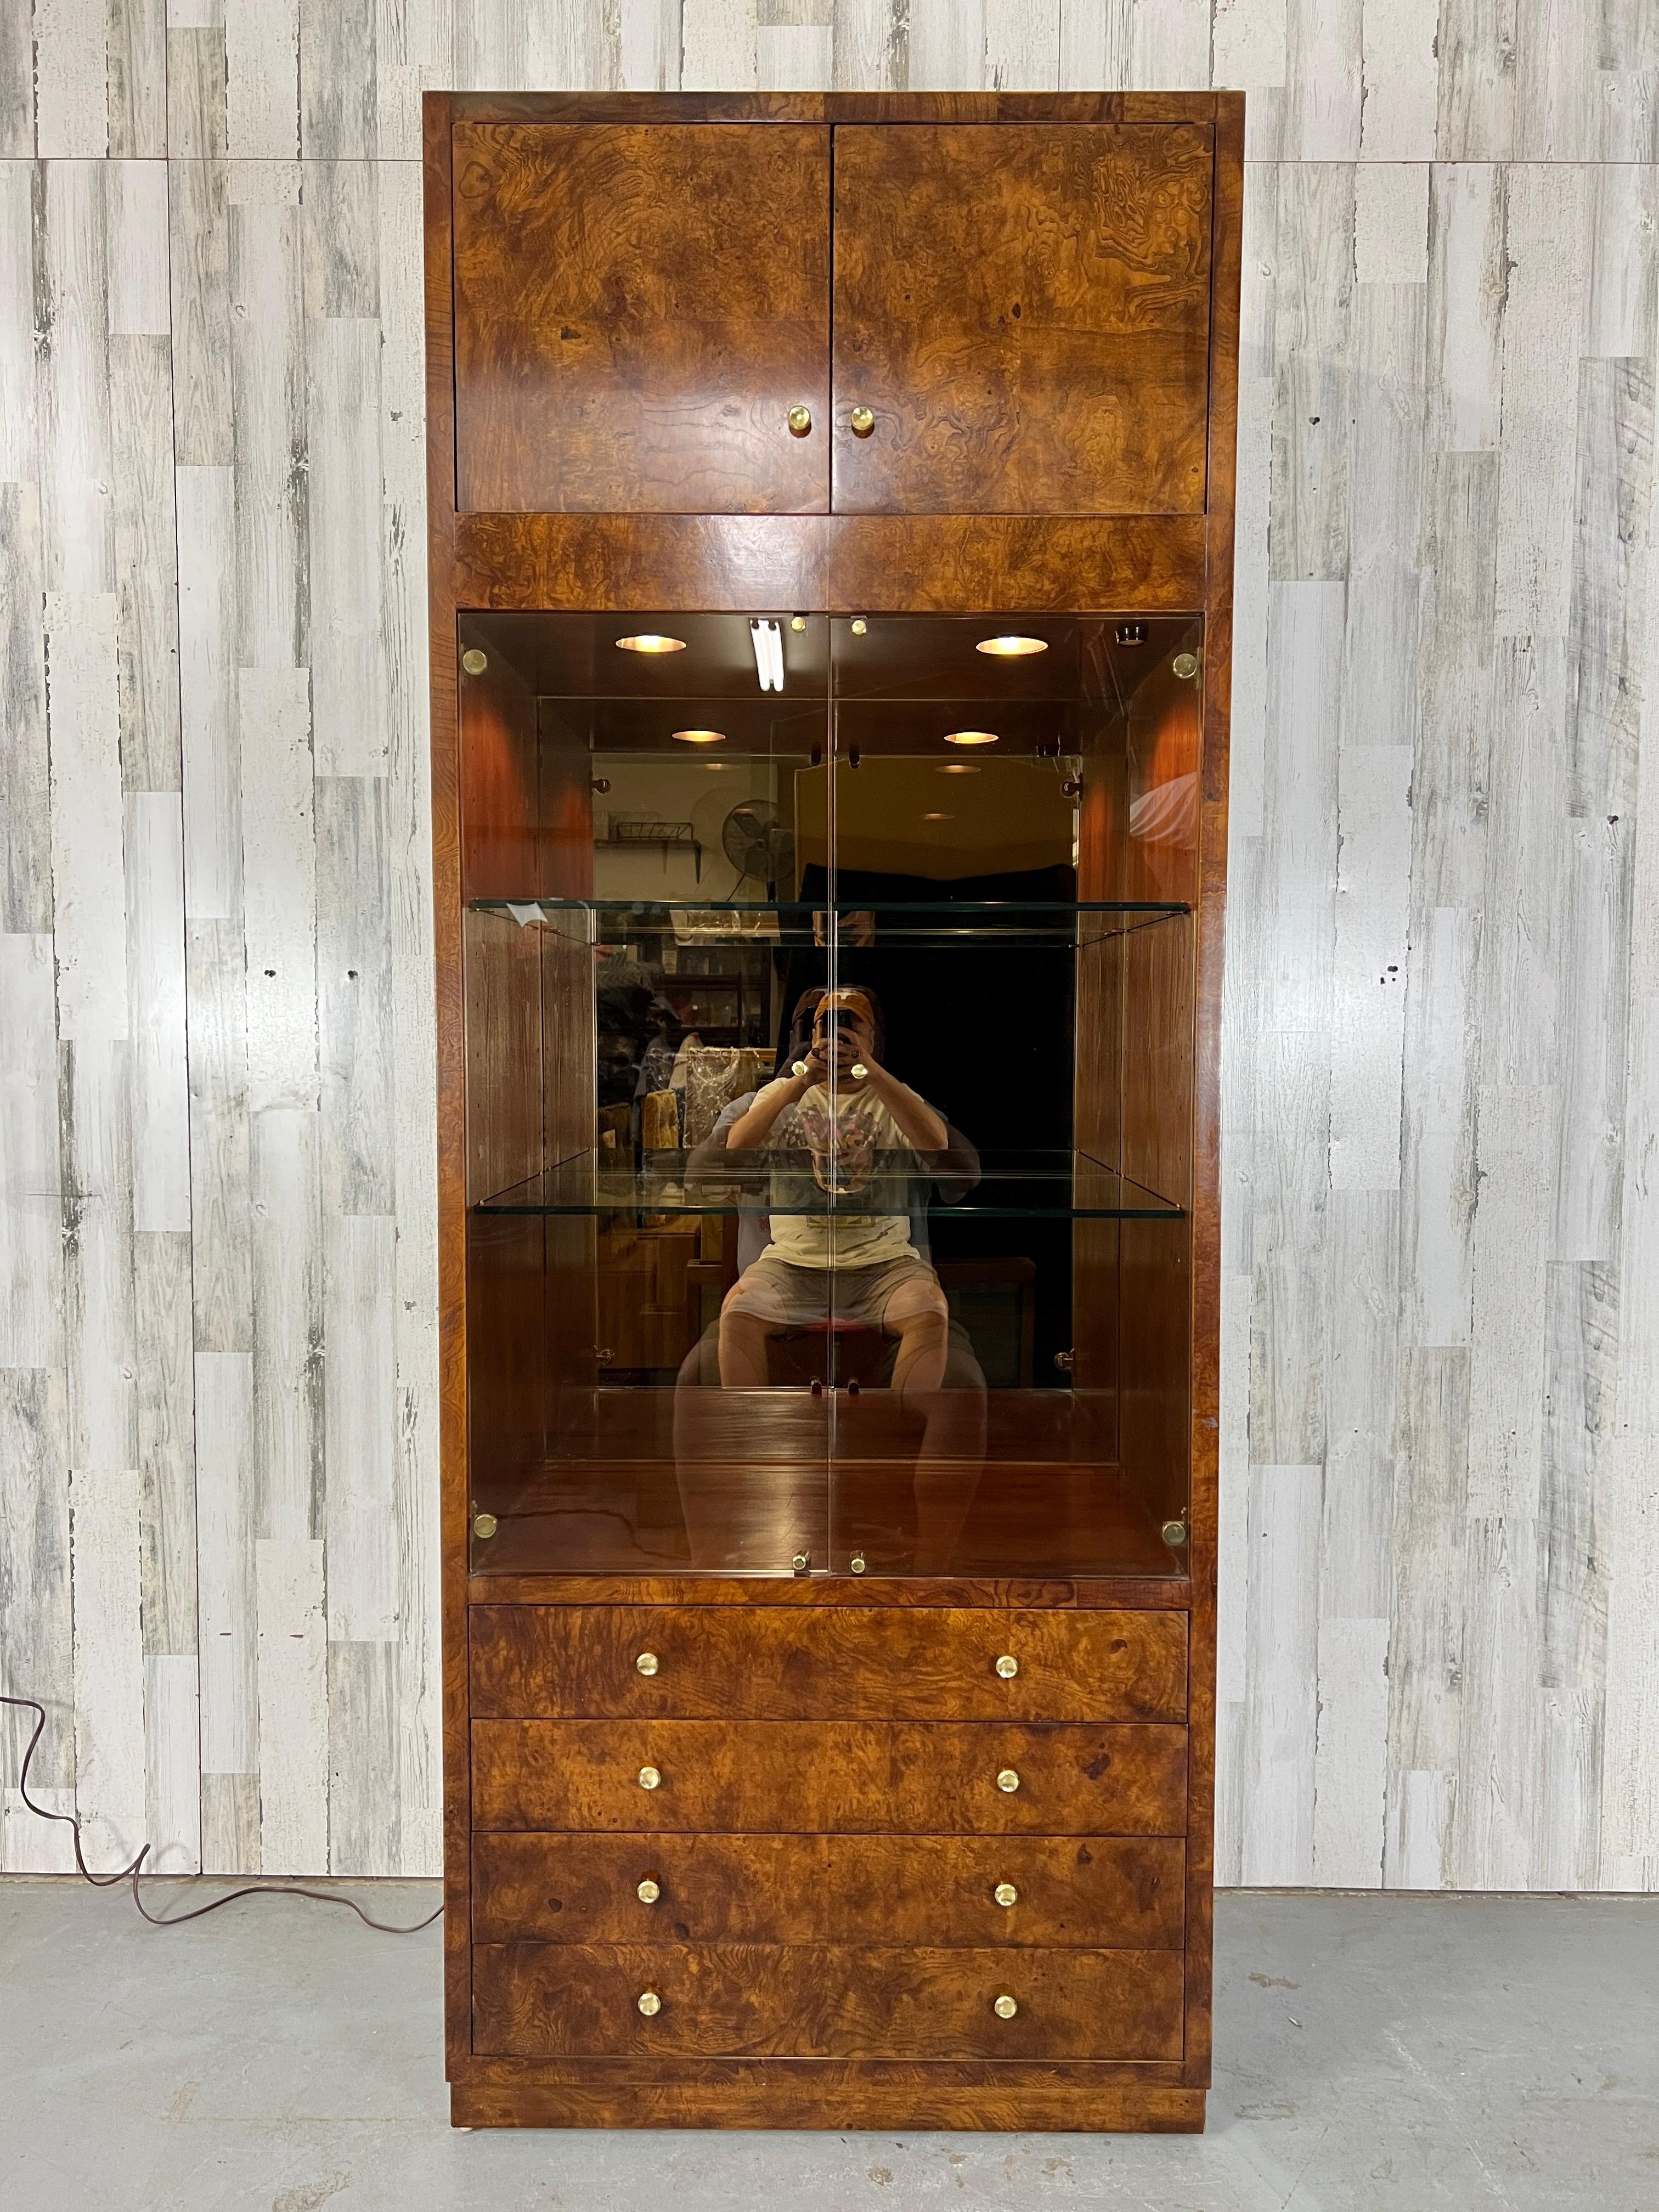 Elm burl wood veneer. Recessed lighting in the cabinet to illuminate the adjustable glass shelving. Smoked glass doors & smoked mirror backed. Brass hardware is a stunning accent to the burl wood.
Display area on the cabinet measures: 18 D x 31.5 W